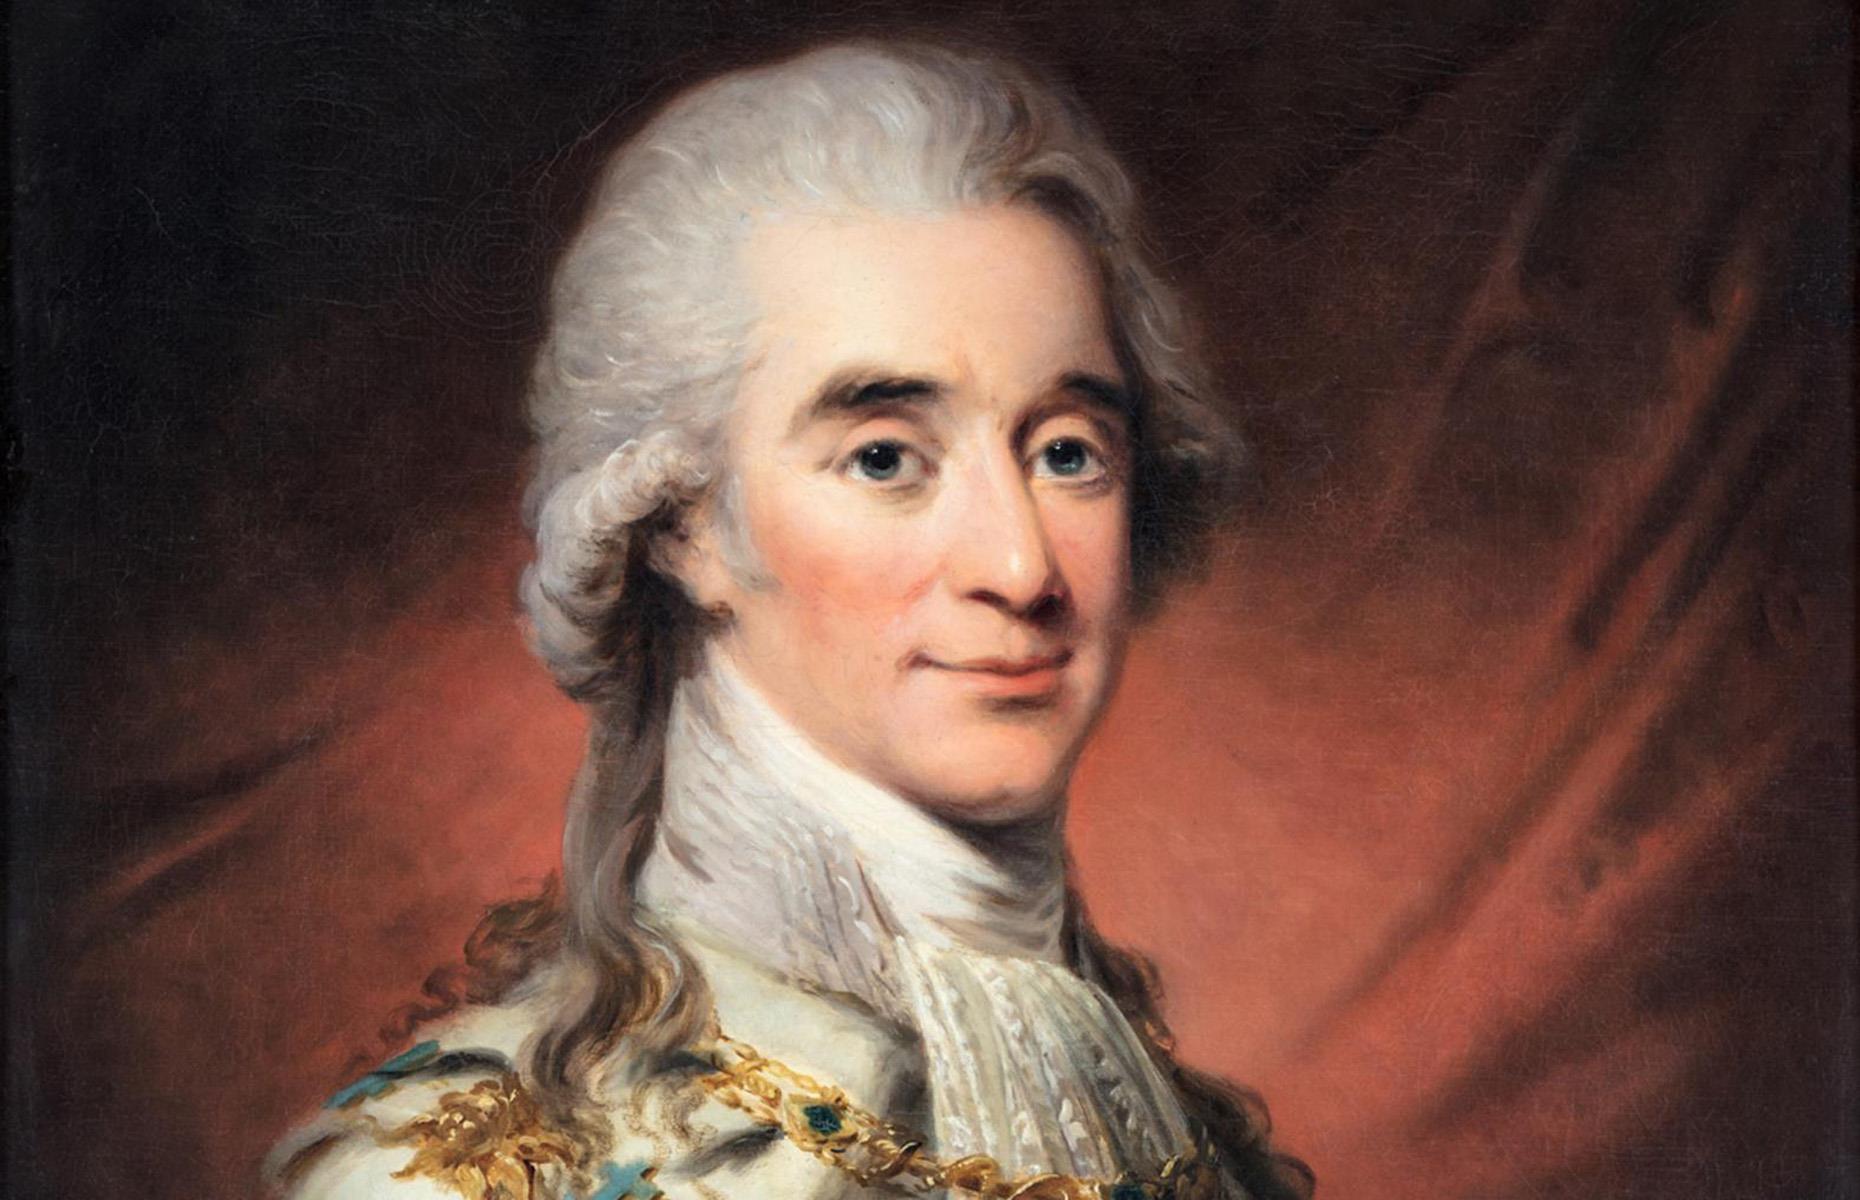 <p>Marie Antoinette's reputation at court took another blow when rumors swirled of an affair with the Swedish count Axel von Fersen (pictured). She first met him at a ball in 1774 and was said to be charmed by his good looks and chivalrous nature.</p>  <p>Over the years, Fersen visited the Queen often and even lived in an apartment above hers, with correspondence between the pair suggesting that their relationship was indeed romantic in nature.</p>  <p>It's unclear if he or her husband fathered the royal children. Louis XVI claimed them all as his own, although a book published in 2015 by historian Evelyn Farr suggests the count was most likely the father of Sophie and Louis Charles.</p>